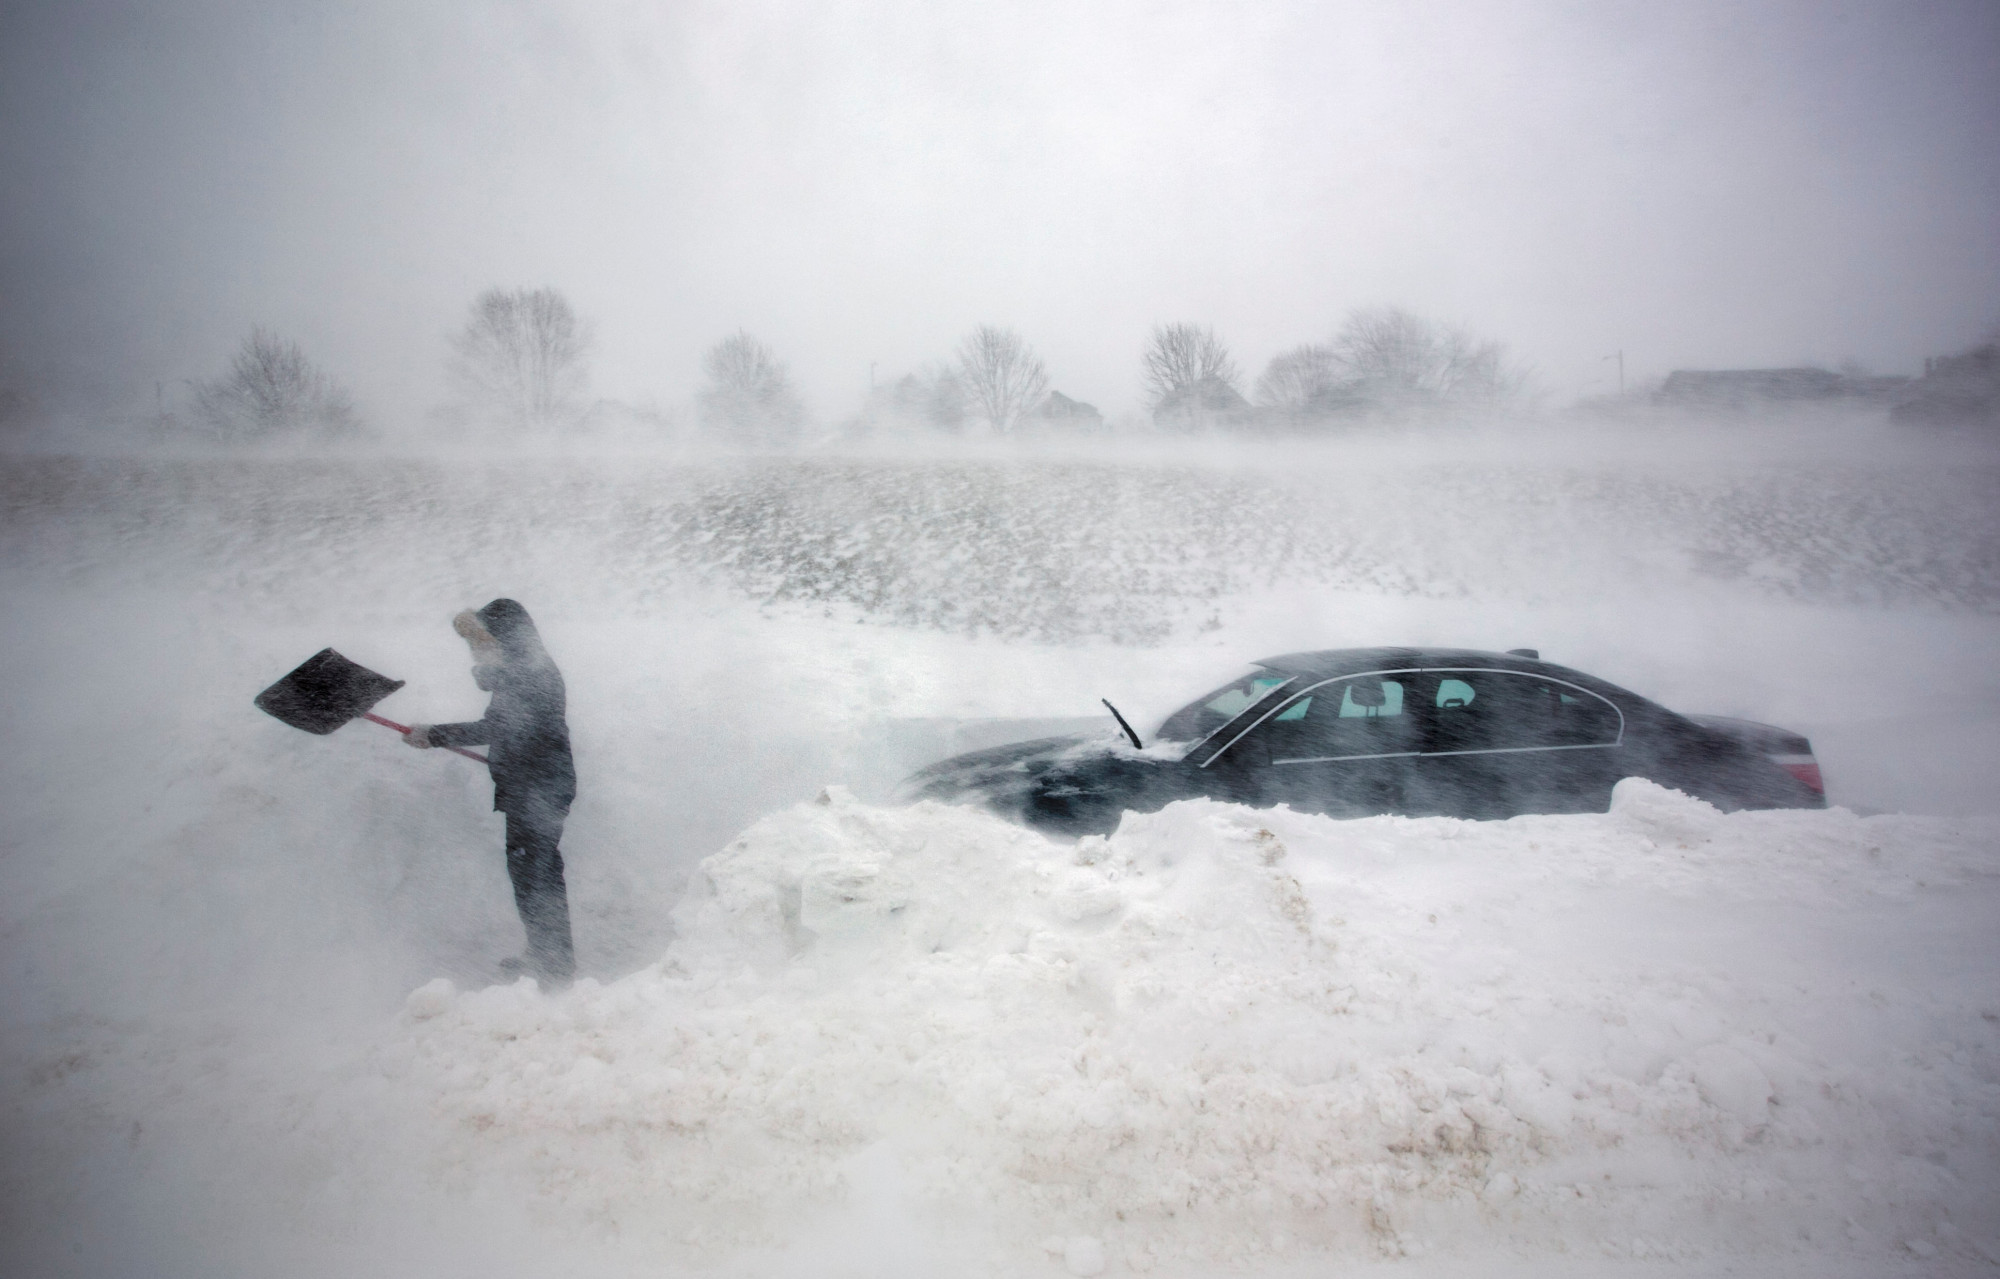 A woman digs out her car after it was blocked in by drifting snow during a blizzard, Feb. 9, 2013, in Portland, Maine. The storm dumped more than 30 inches of snow as of Saturday afternoon, breaking the record for the biggest storm on record.